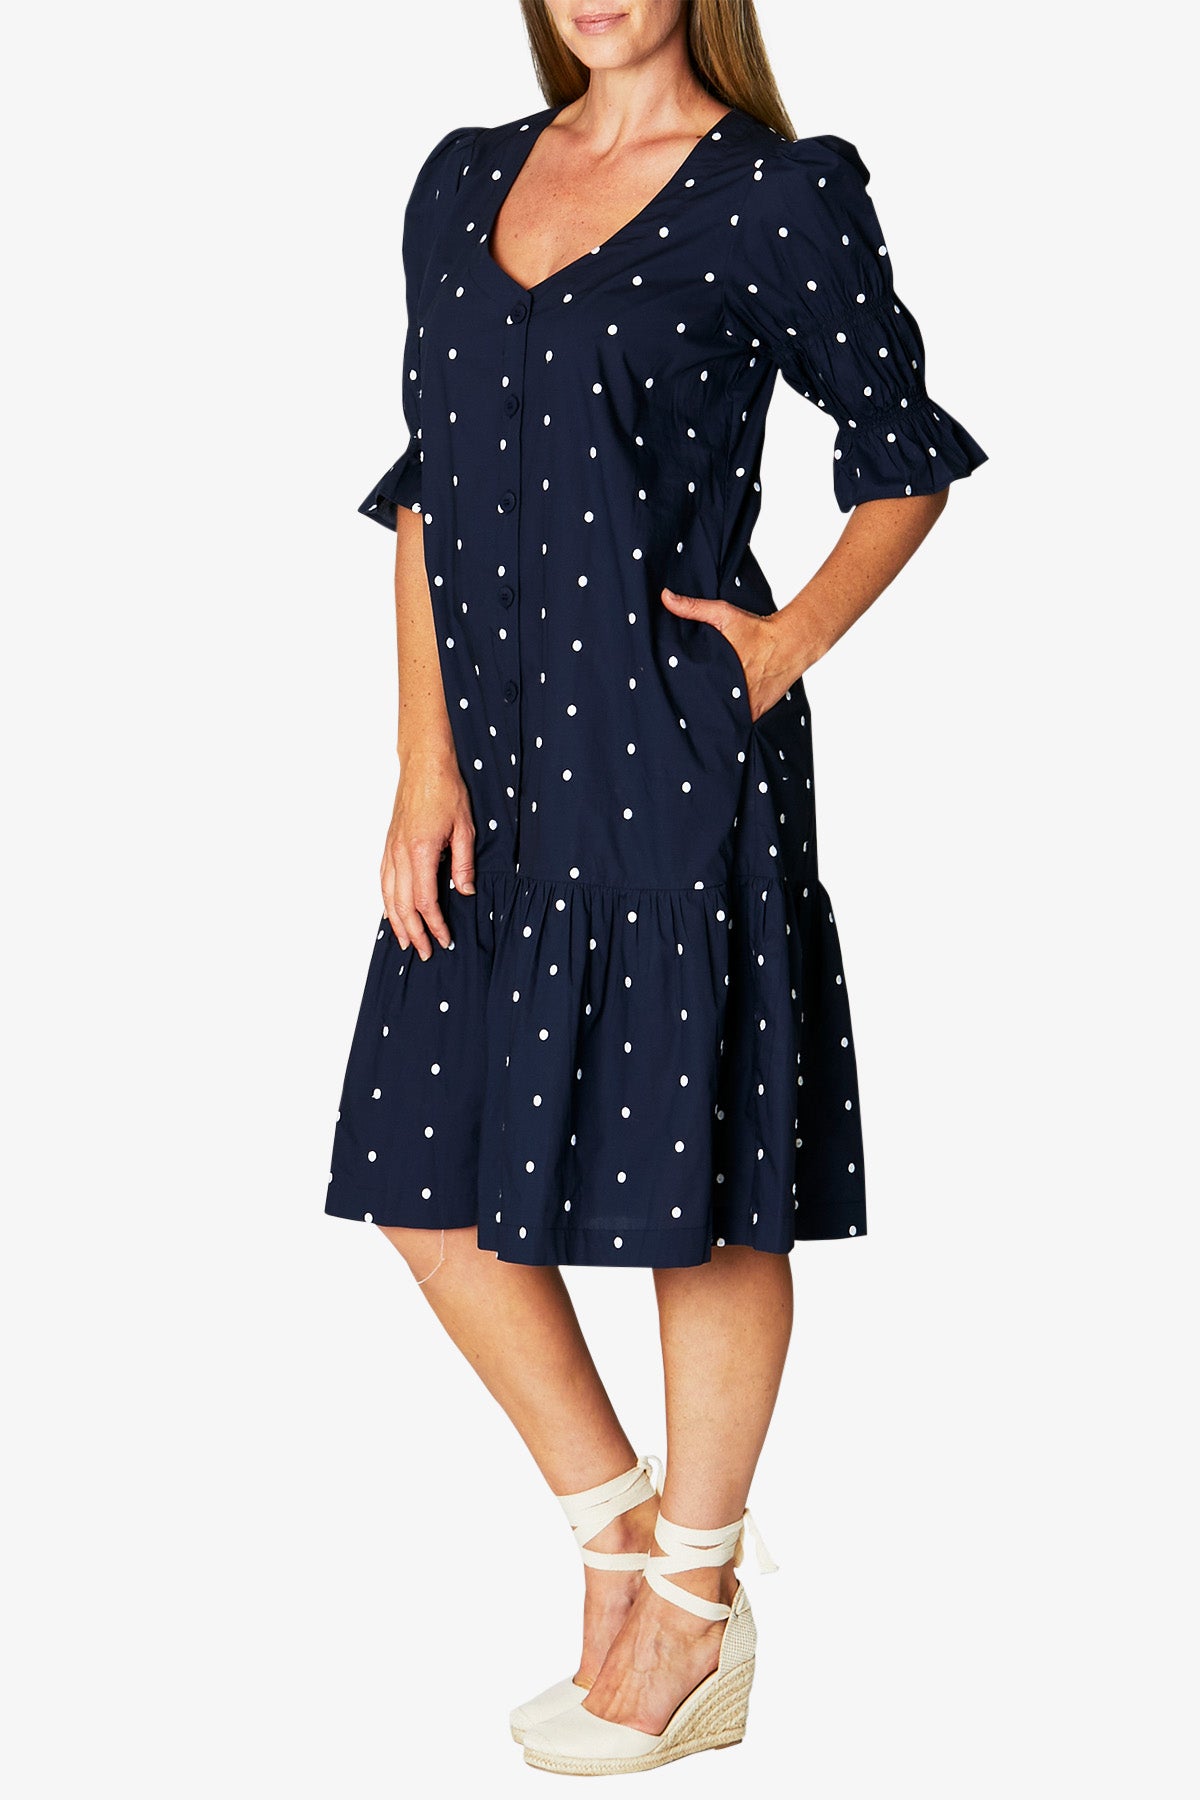 Embroided Spot Ruffle Dress Navy and White